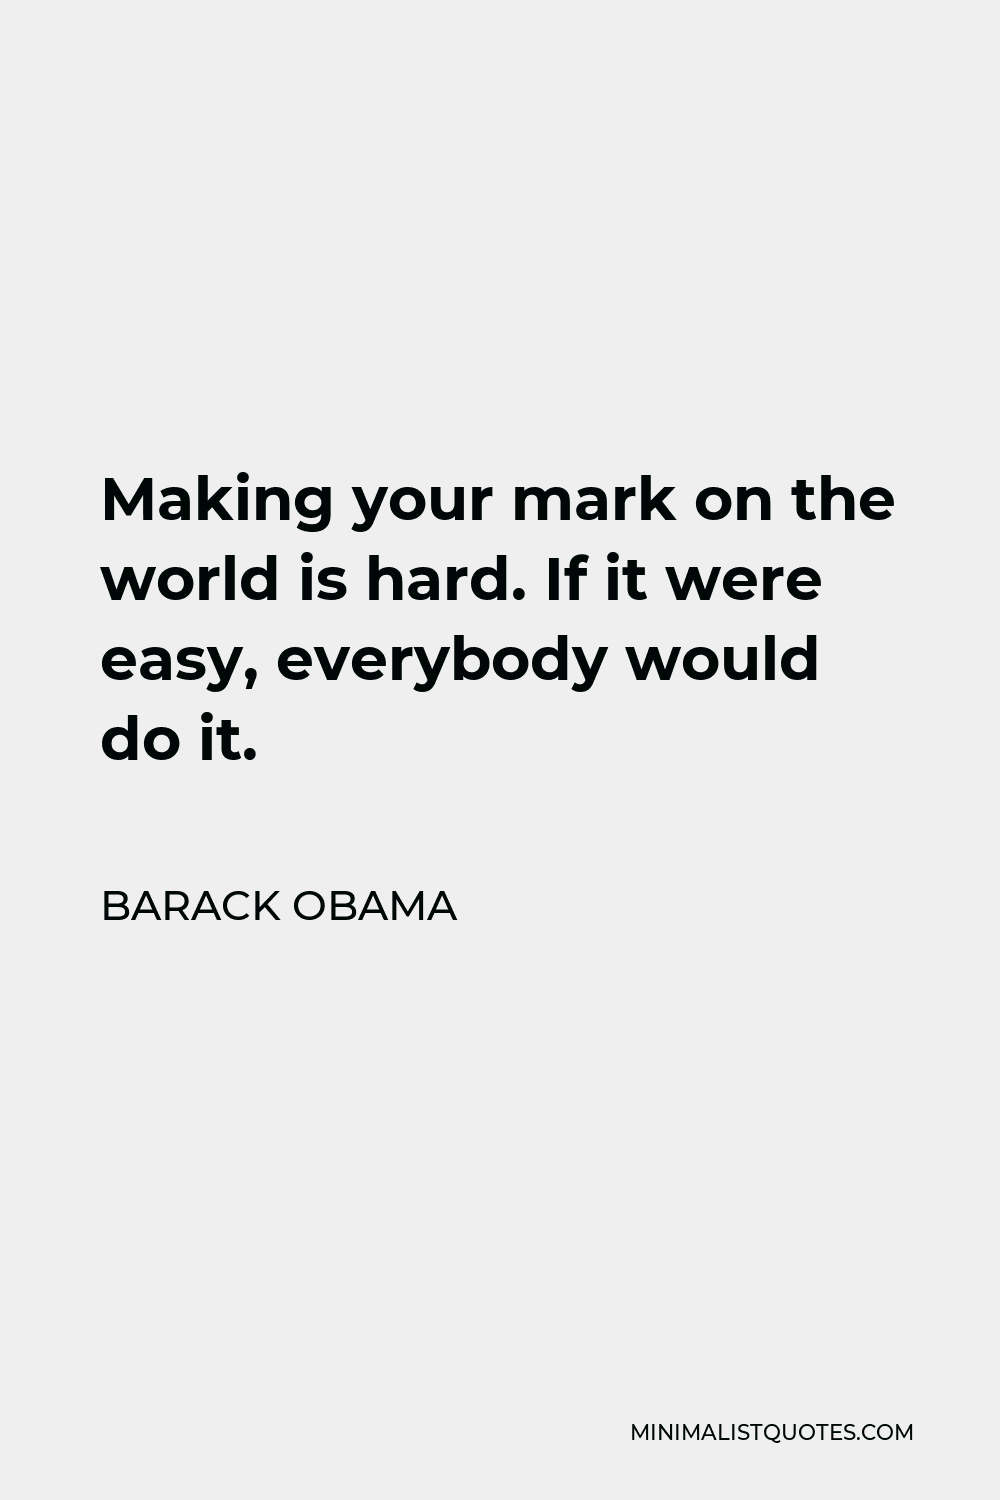 Barack Obama Quote - Making your mark on the world is hard. If it were easy, everybody would do it.